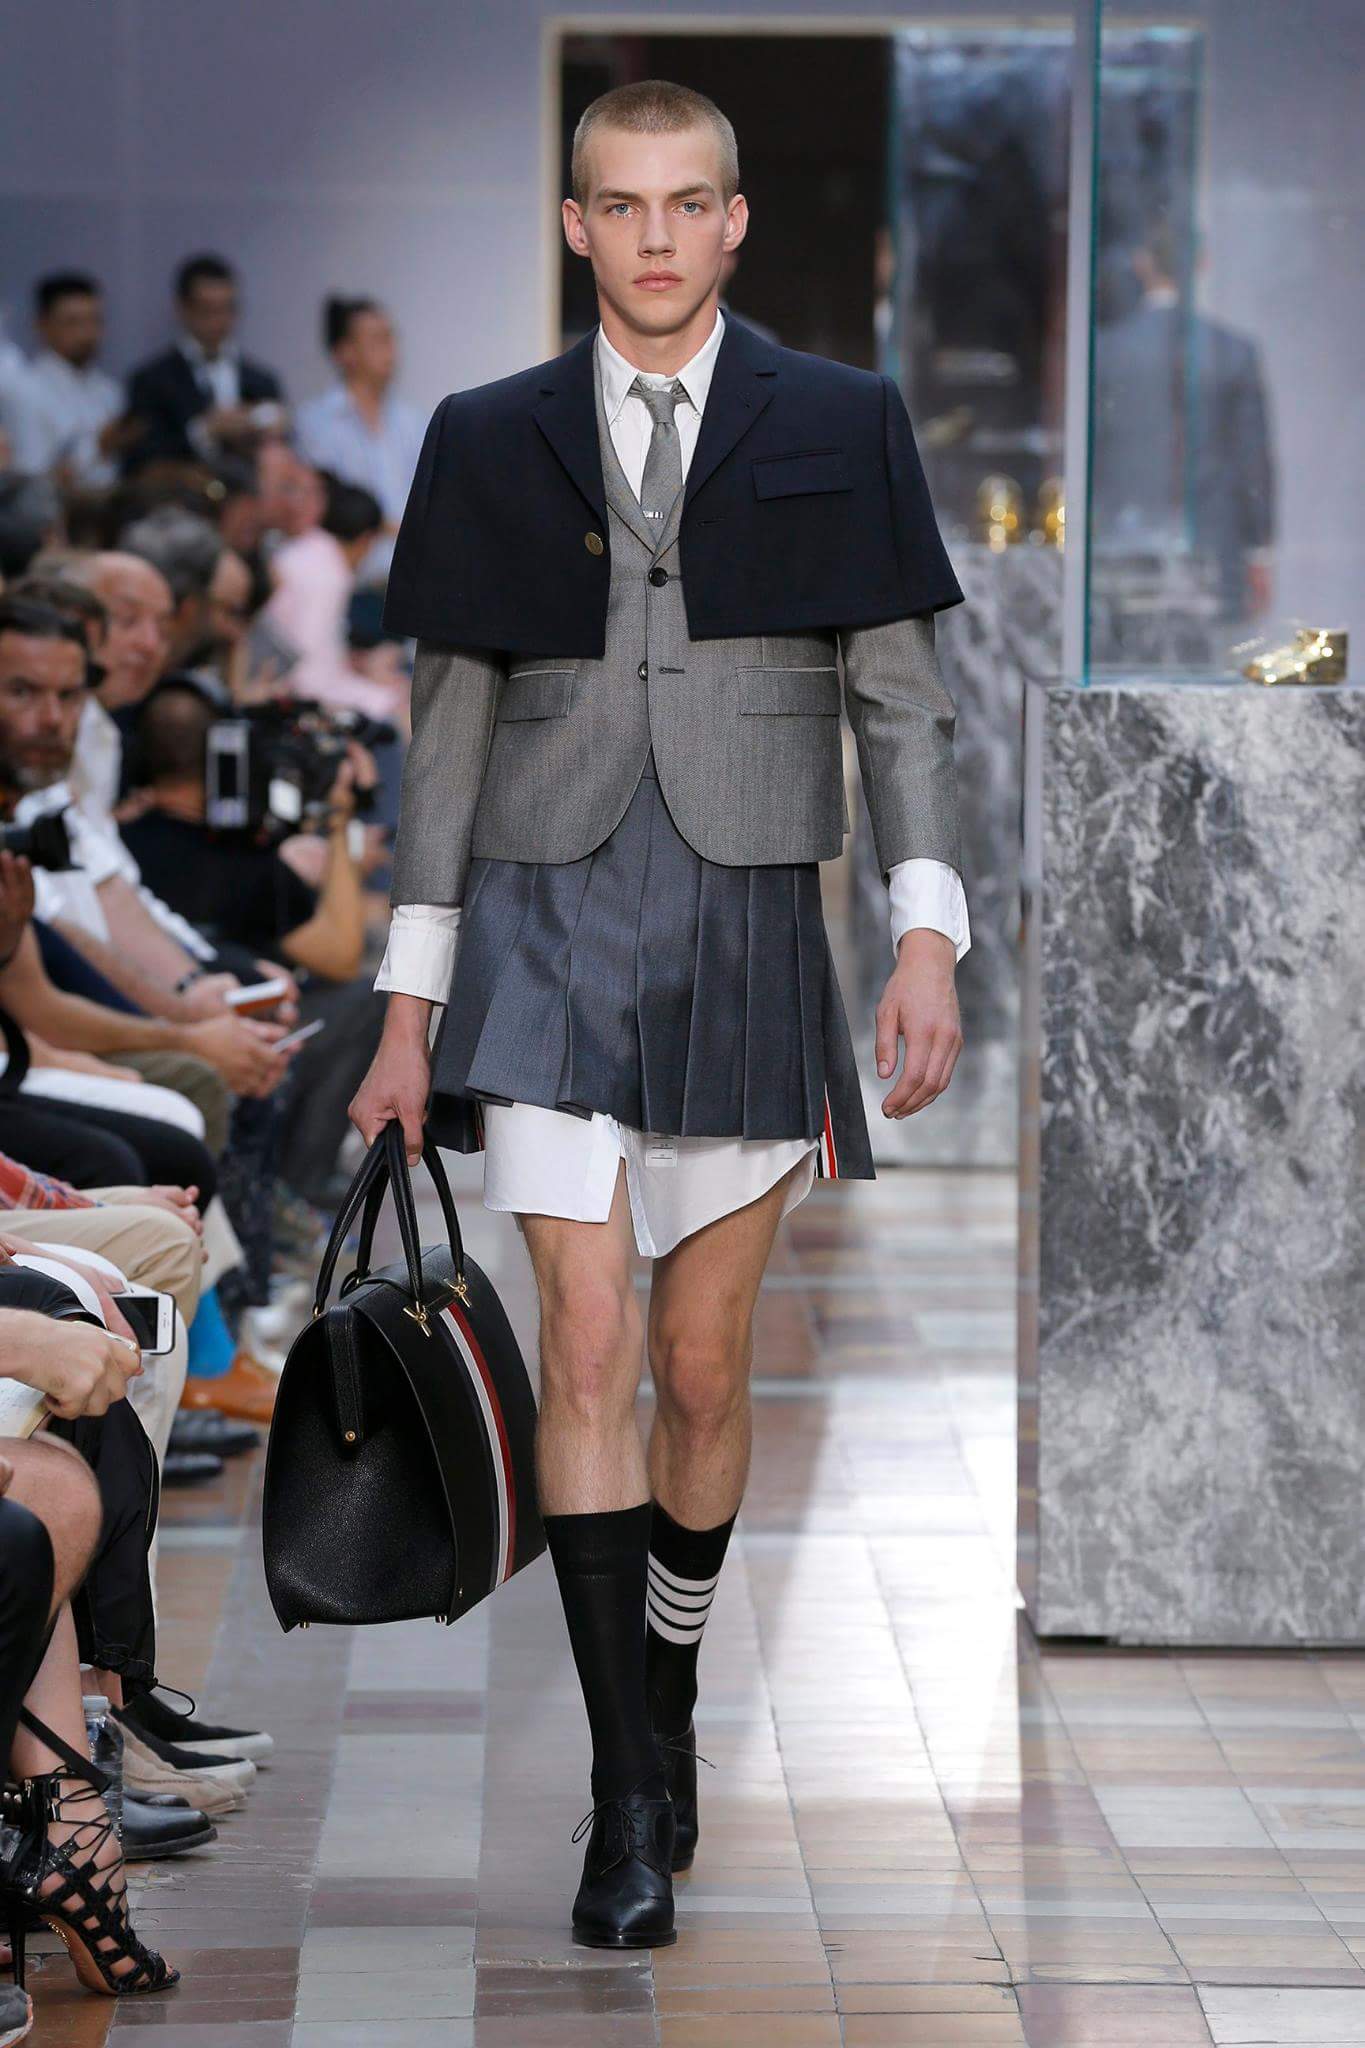 The Effeminate Man New Fashion Trend Has Men Dressing In Skirts Dresses And 8 Inch Heels 